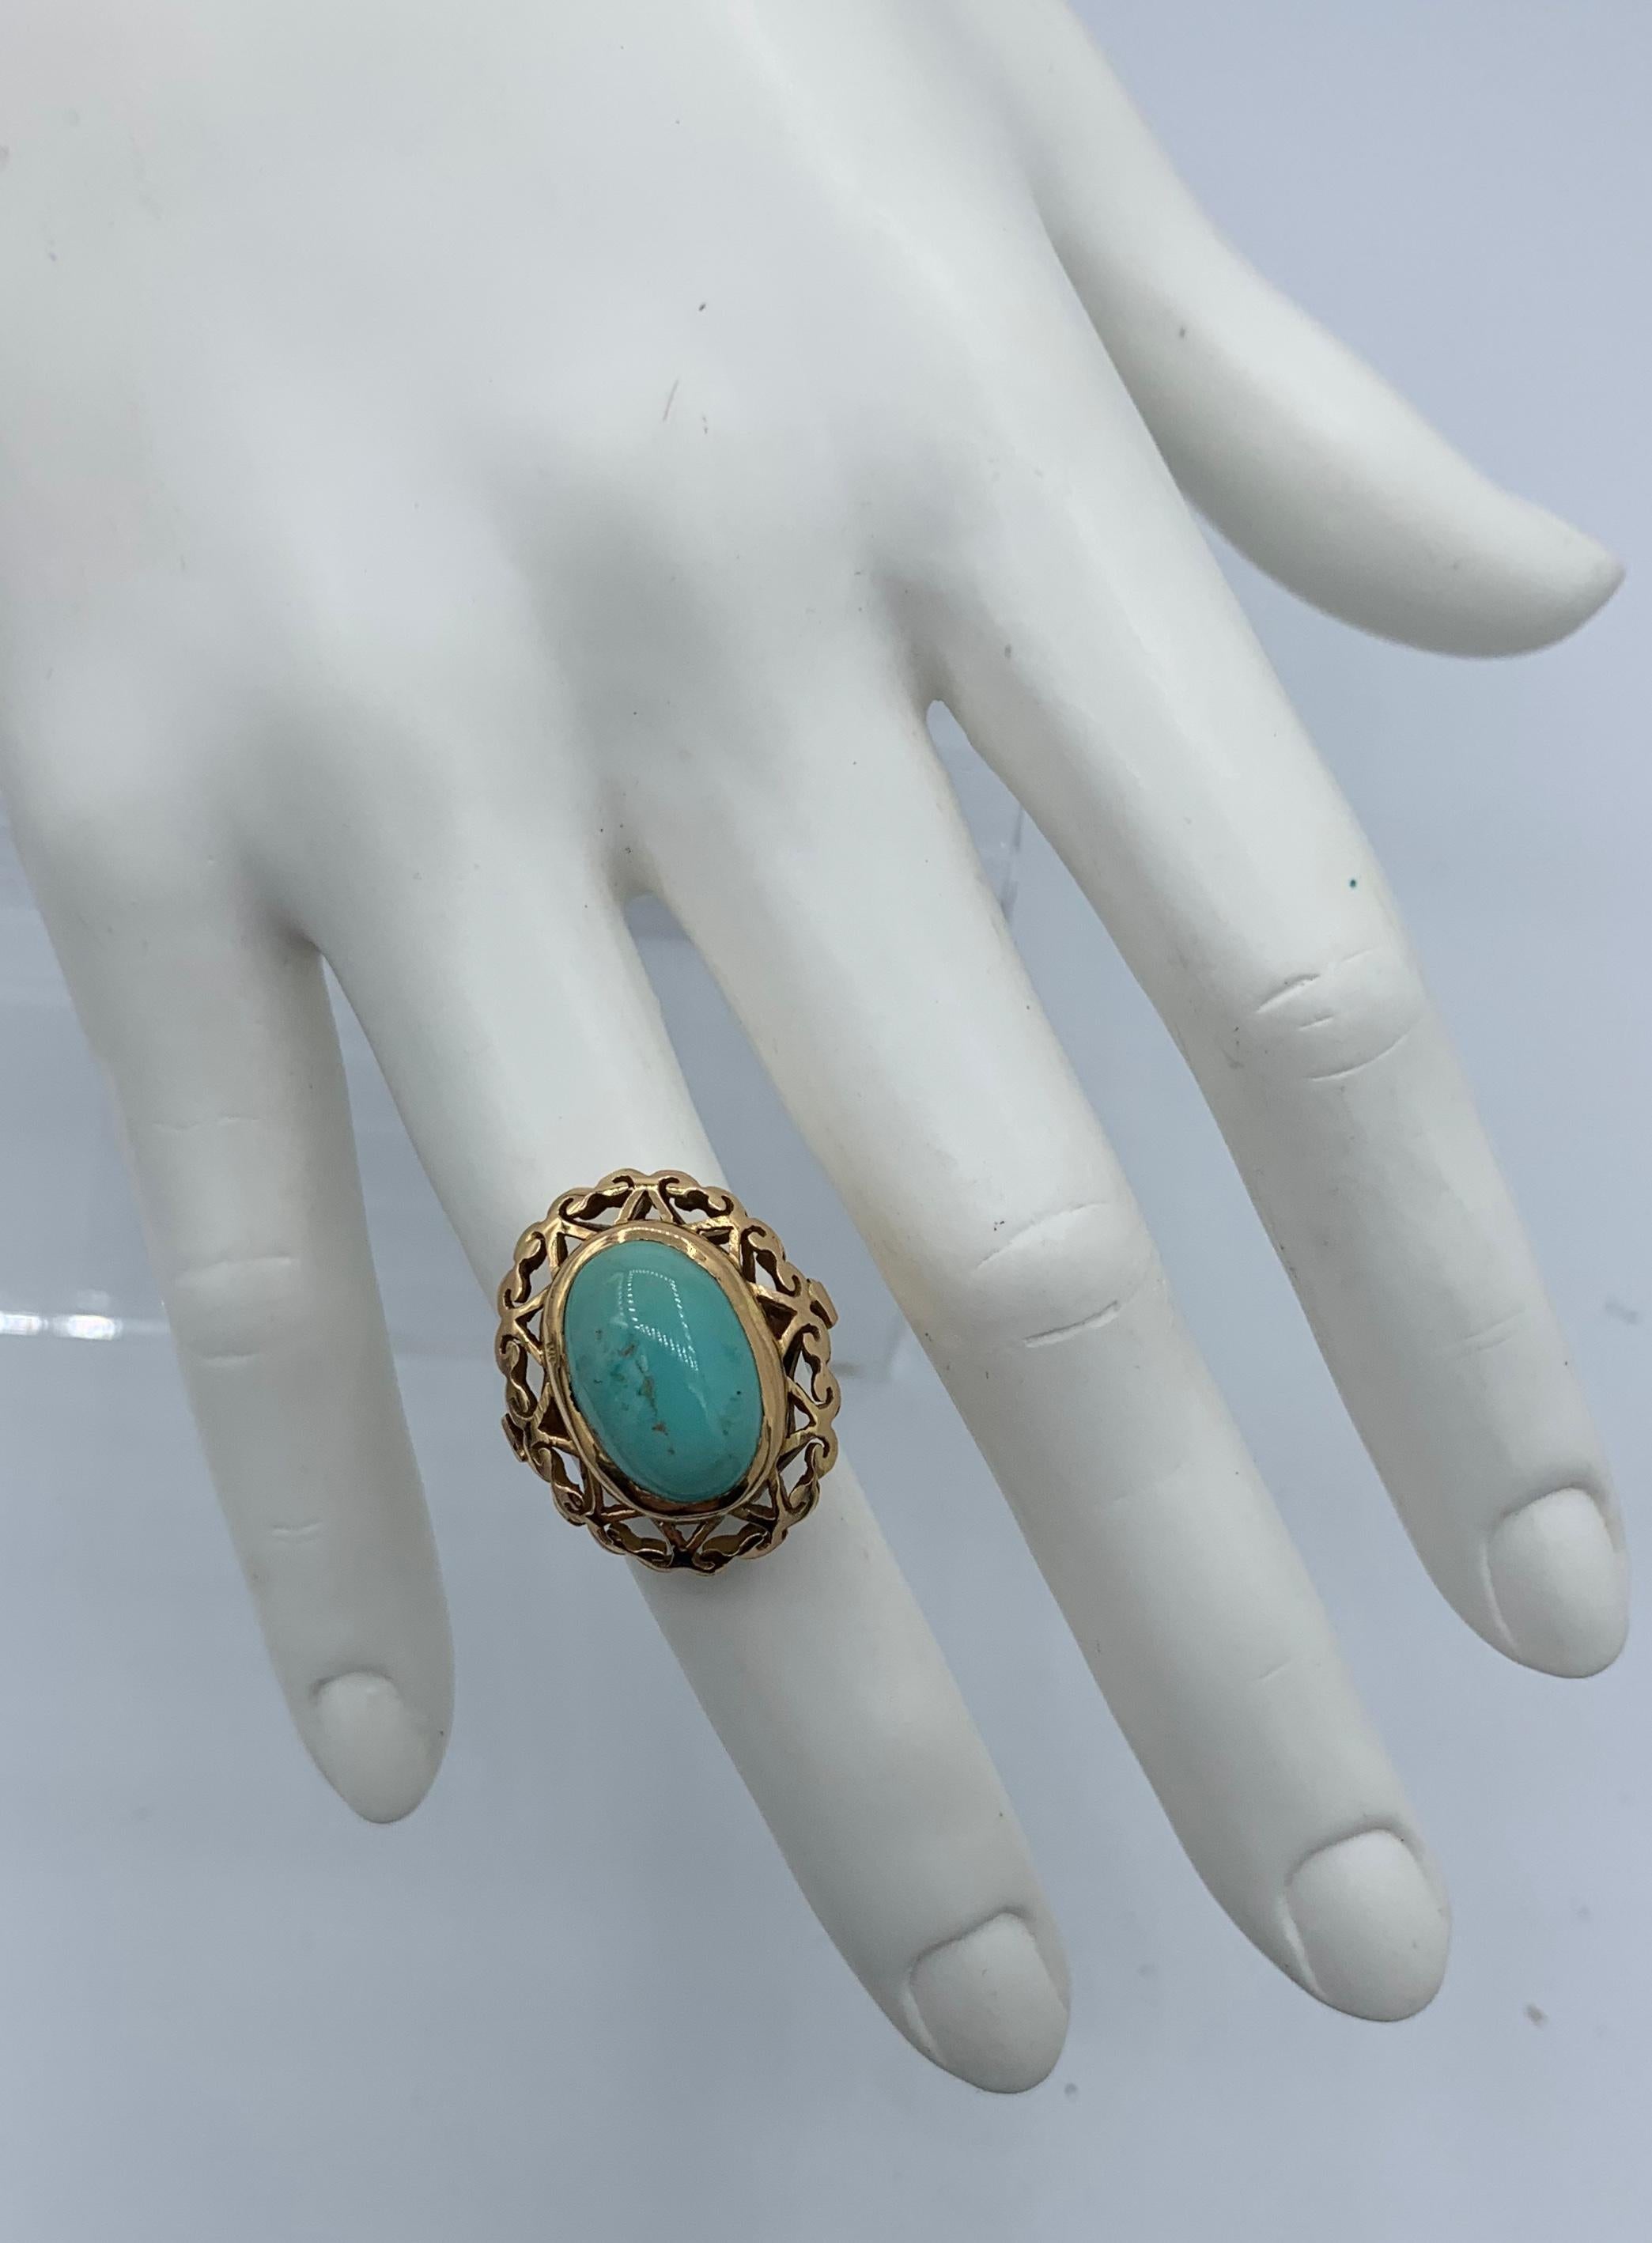 This is a gorgeous antique Turquoise Ring with a stunning 15mm by 11mm Turquoise Cabochon.  The Turquoise is set in a wonderful open work scroll motif border setting in 18 Karat Yellow Gold.  The vivid oval Turquoise cabochon is of such lovely color